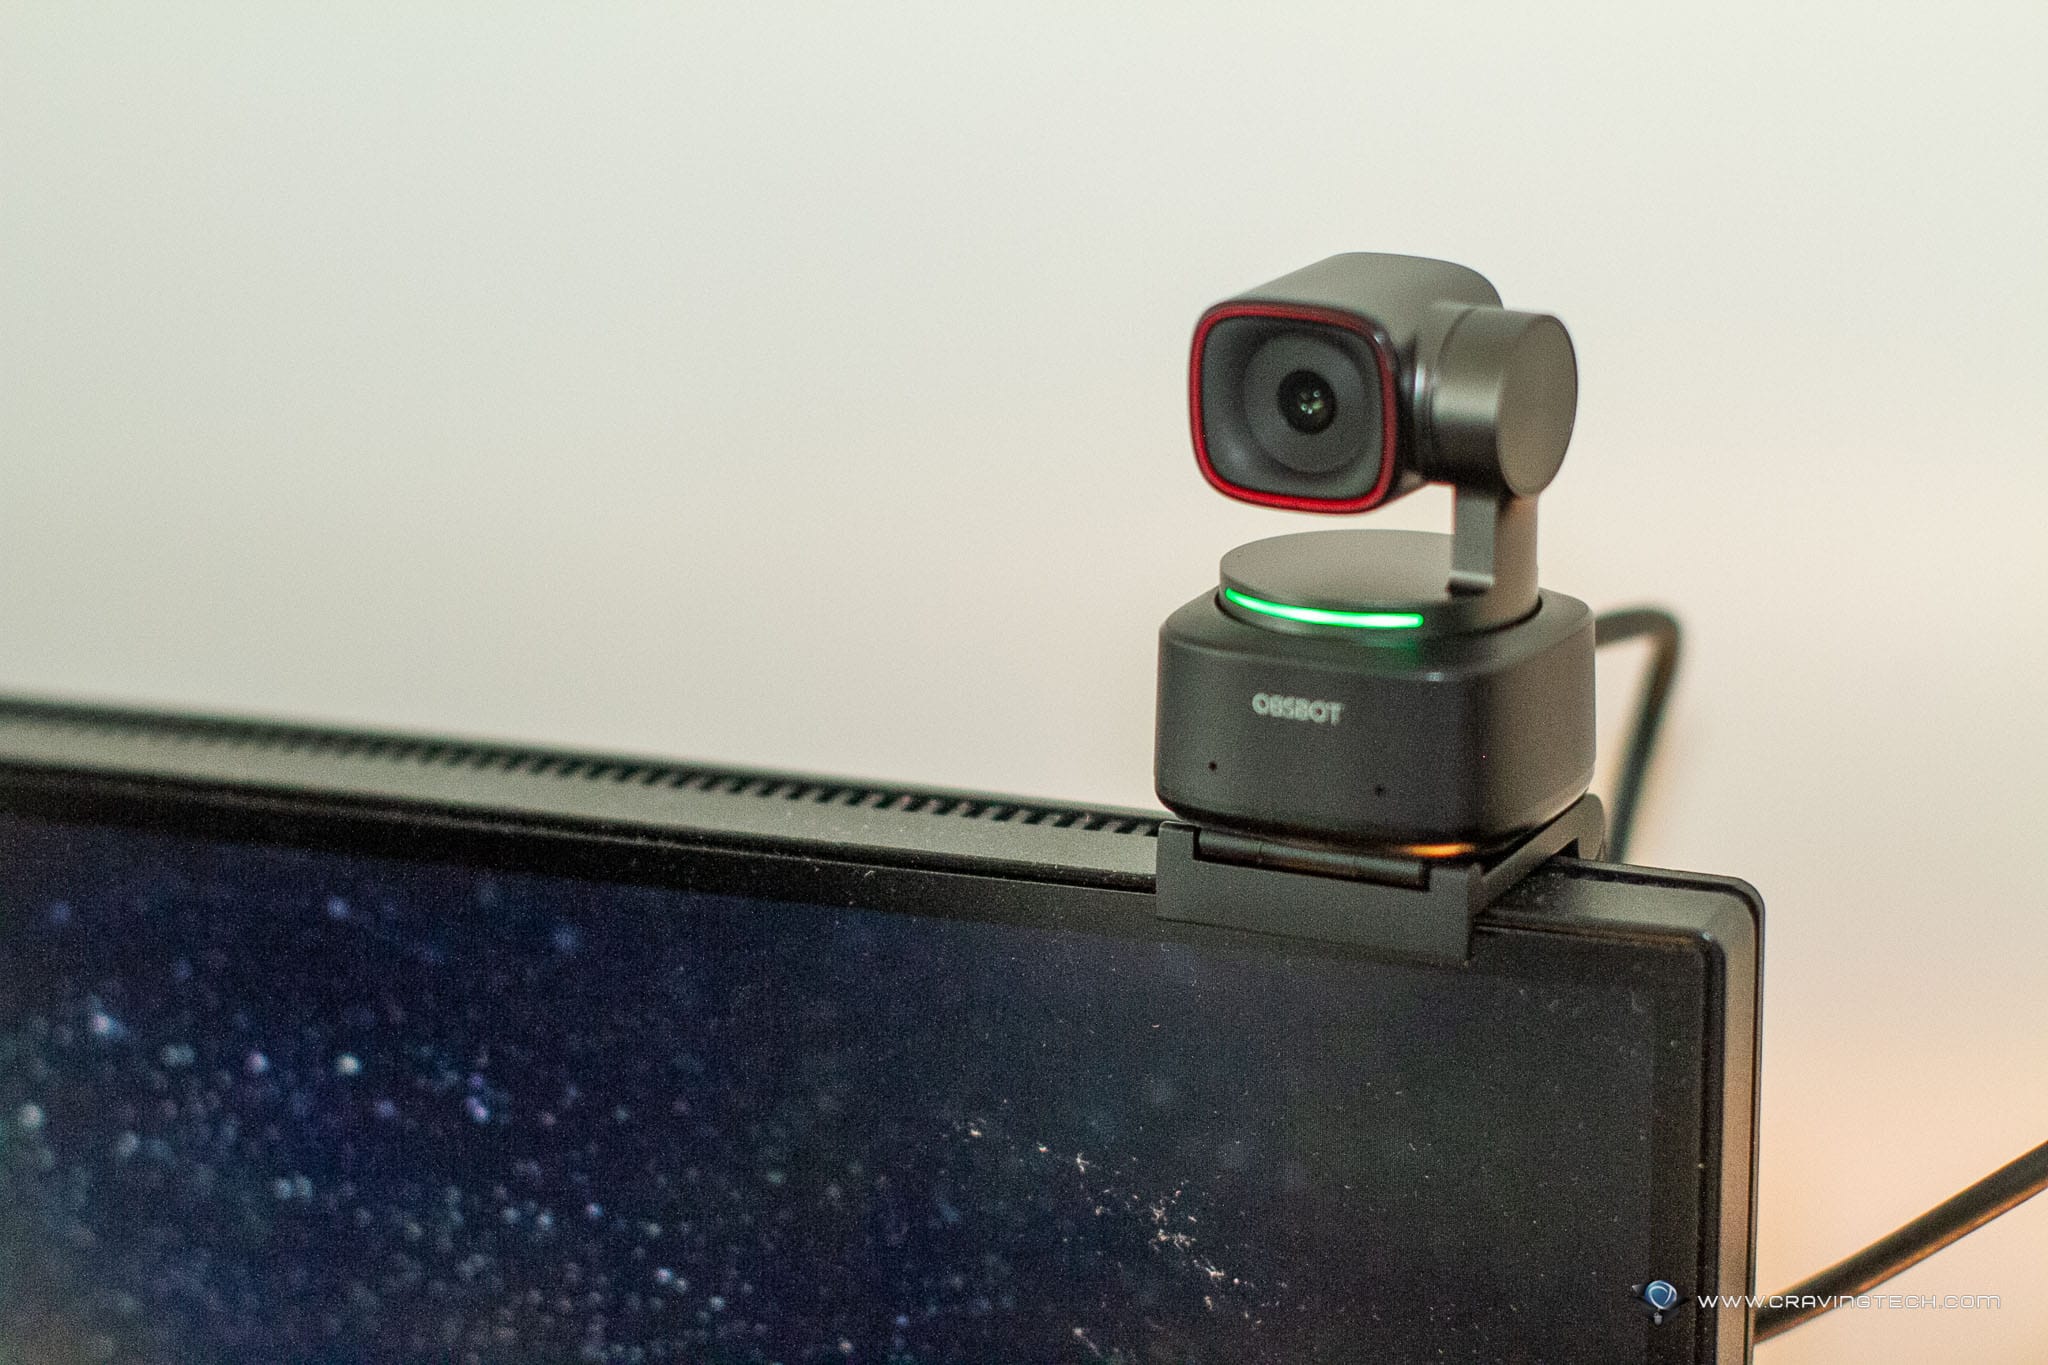 Great 4K webcam with AI tracking that works really well – OBSBOT Tiny 2 Webcam Review